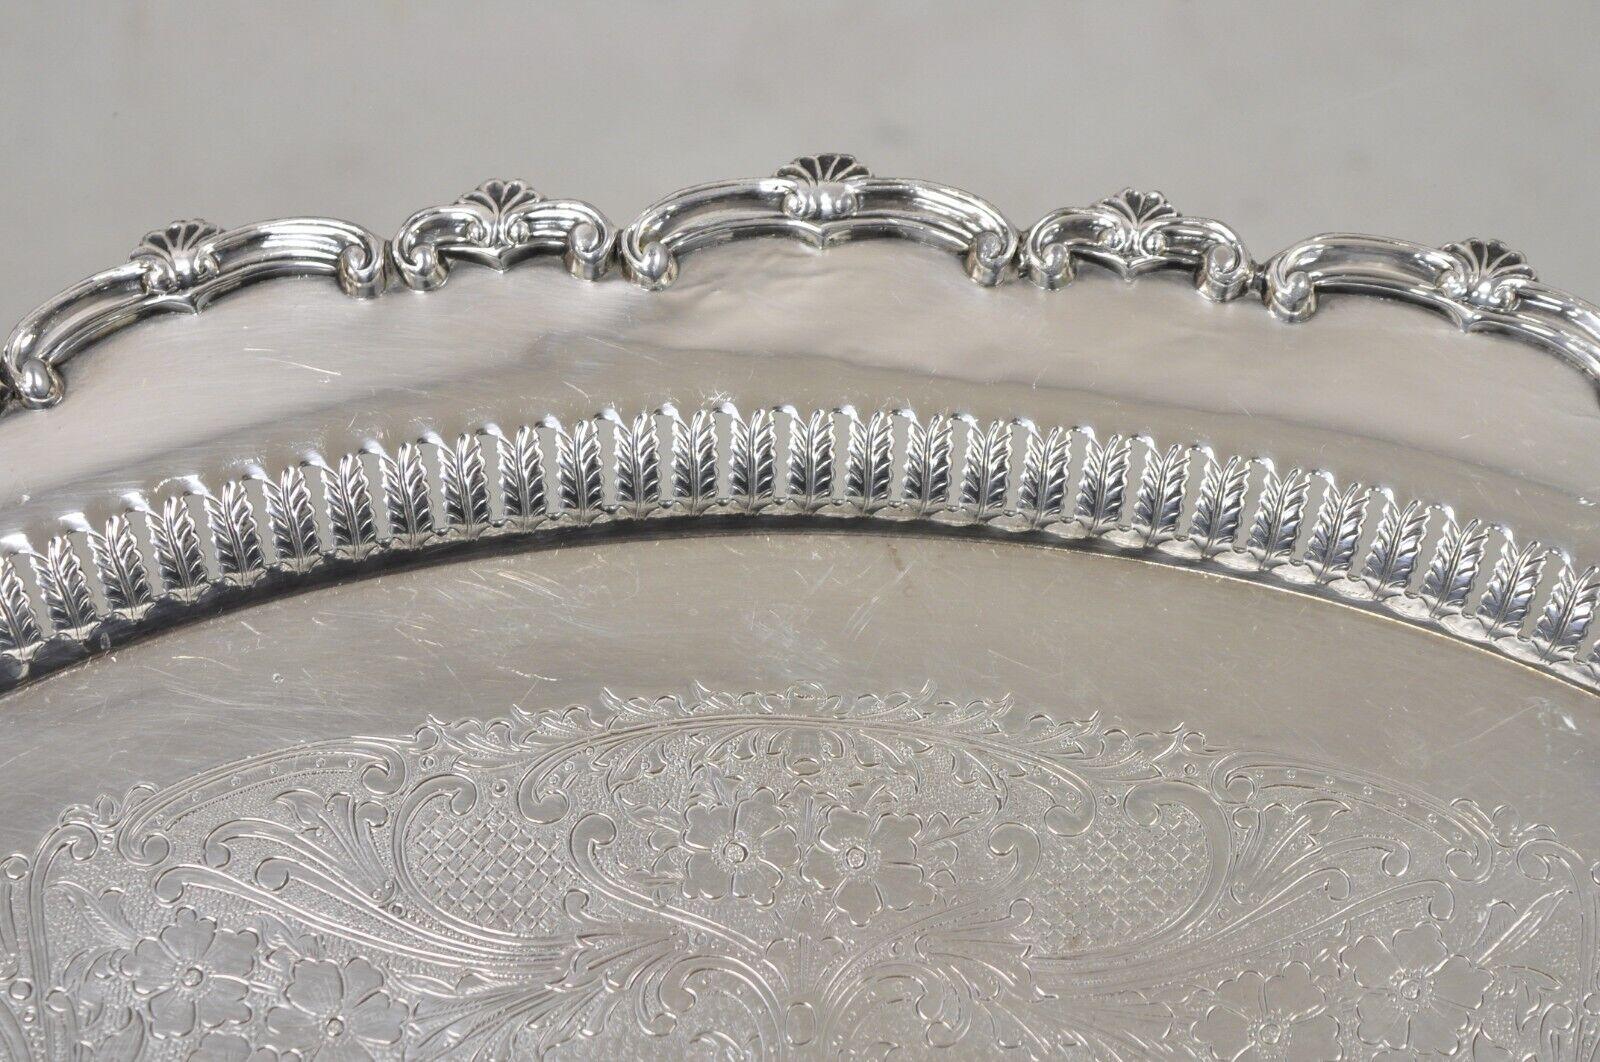 20th Century Antique Edwardian Silver Plated Oval Serving Platter Tray w/ Pierced Decoration